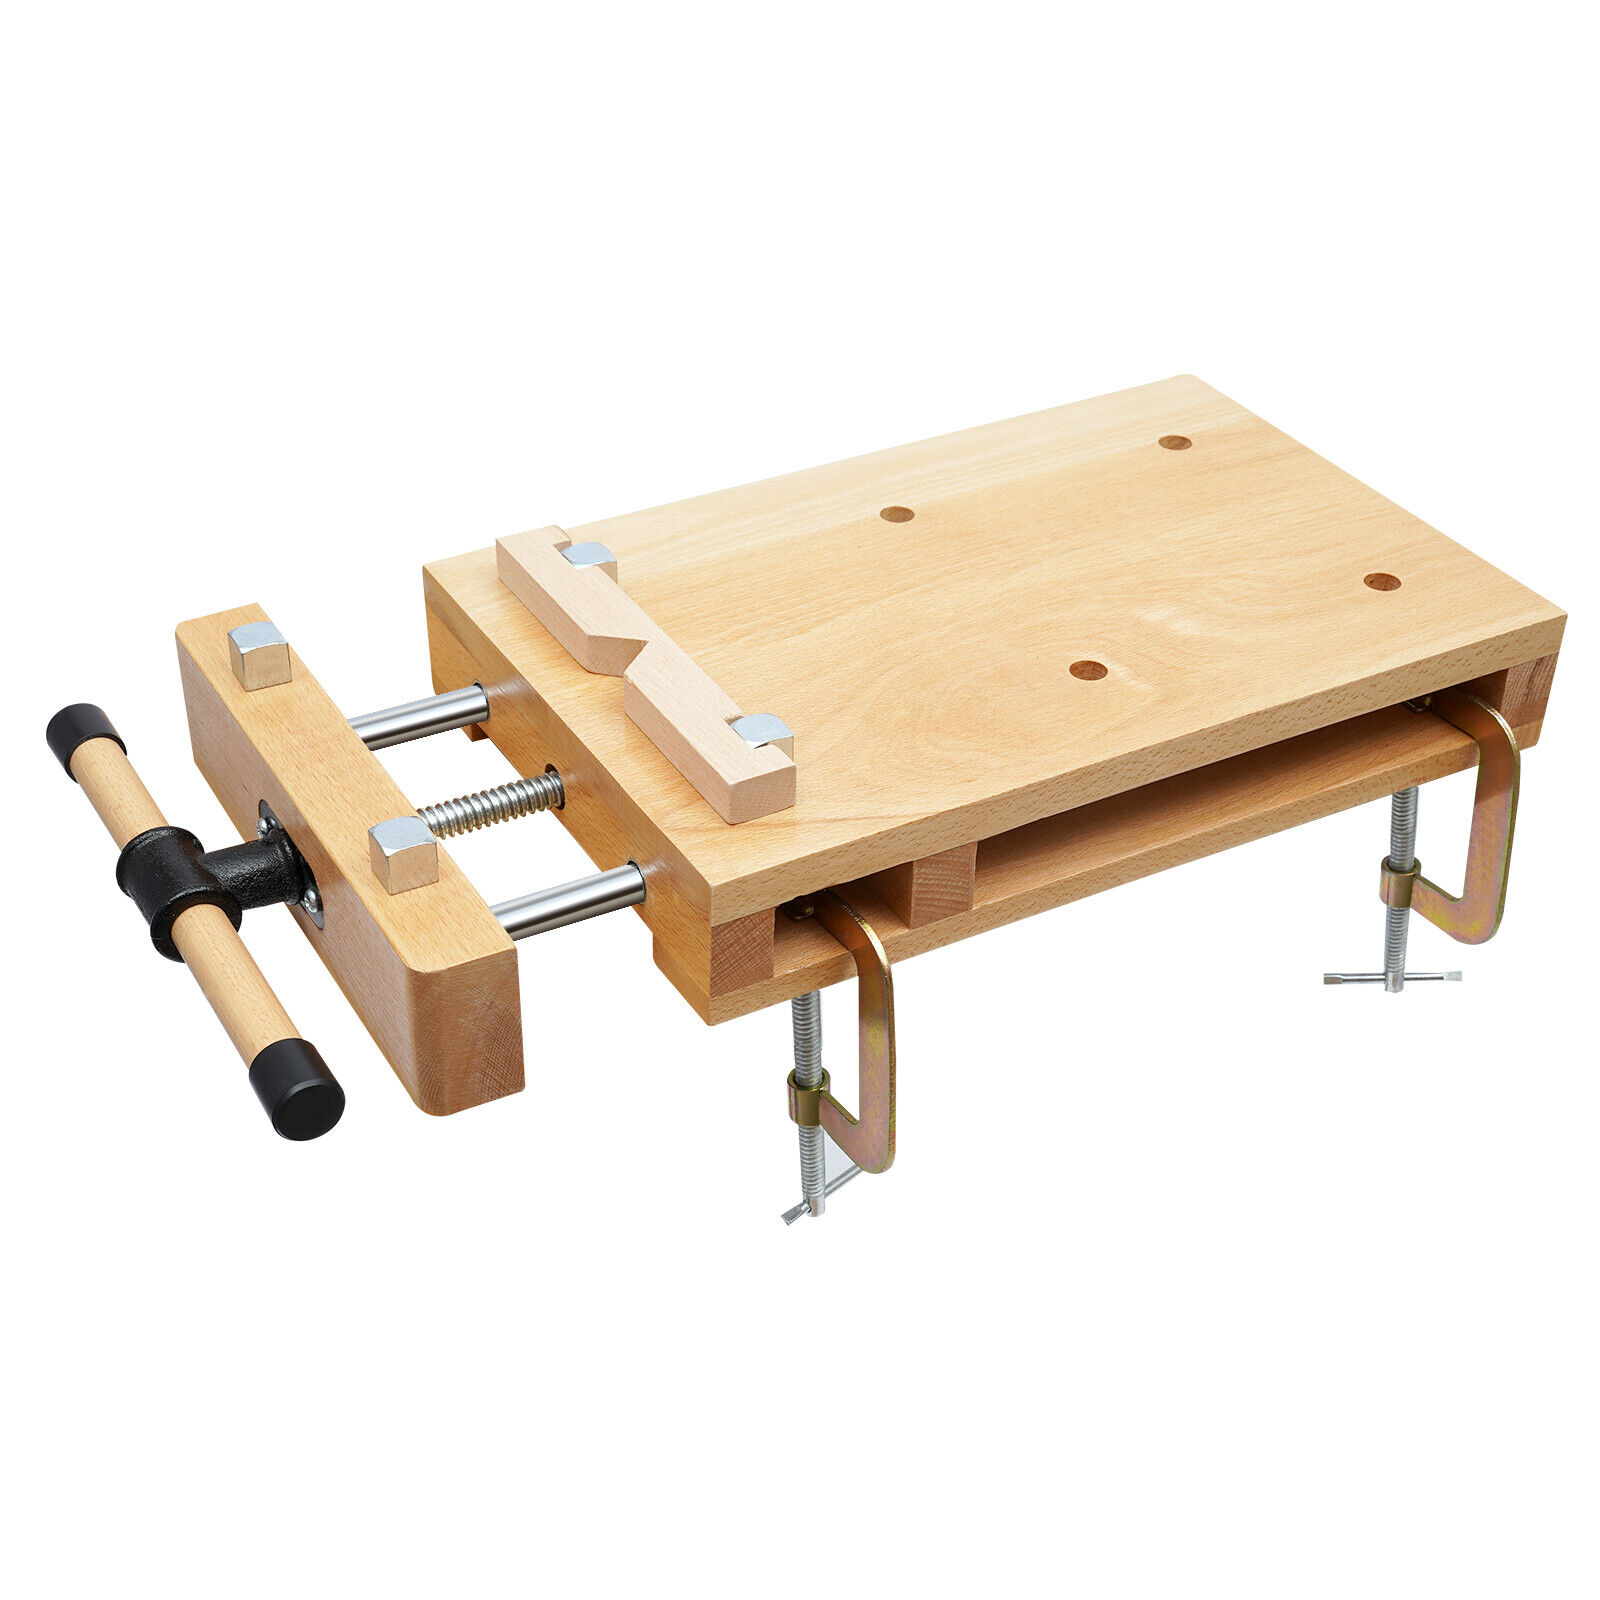 Wood Workbench Desktop Woodworking Vise Portable Smart Vice With Clamping